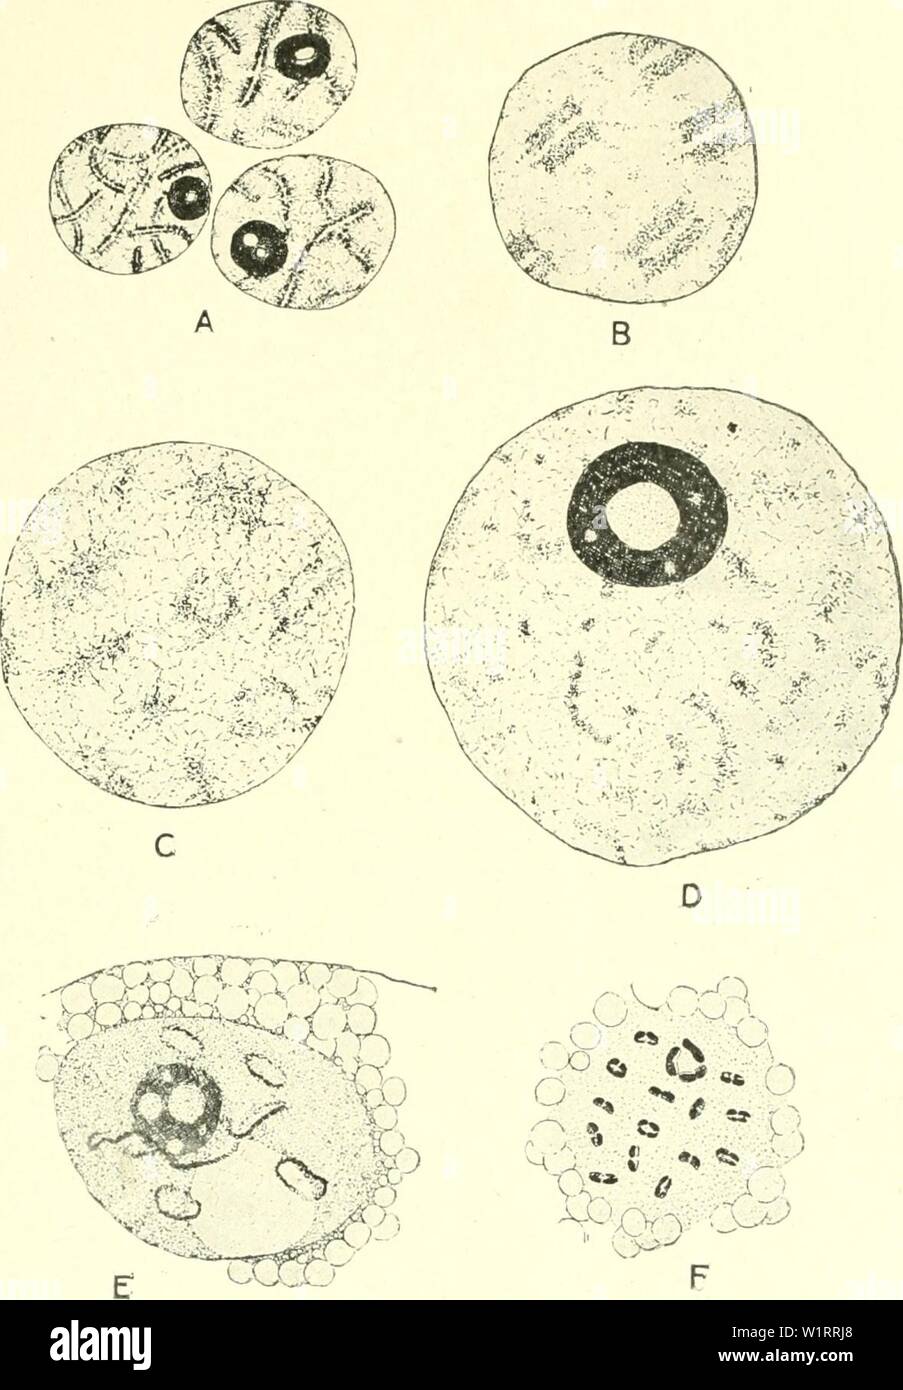 Archive image from page 76 of Cytology, with special reference to. Cytology, with special reference to the metazoan nucleus  cytologywithspec00agaruoft Year: 1920 MEIOSIS IN THE FEMALE 6i germinal vesicles with diffuse chromosomes are to be found, and it is evident that the bivalents resulting from syndesis condense continuously    Fig. 25. The chromosomes during the oogenesis of Diaptomus castor from the pachytene stage (A), through the germinal vesicle stage (B-E) to the condensation of the definitive bivalents (F). (Matschek, A.Z., 1910.) into the definitive bivalents of metaphase I. Animal Stock Photo